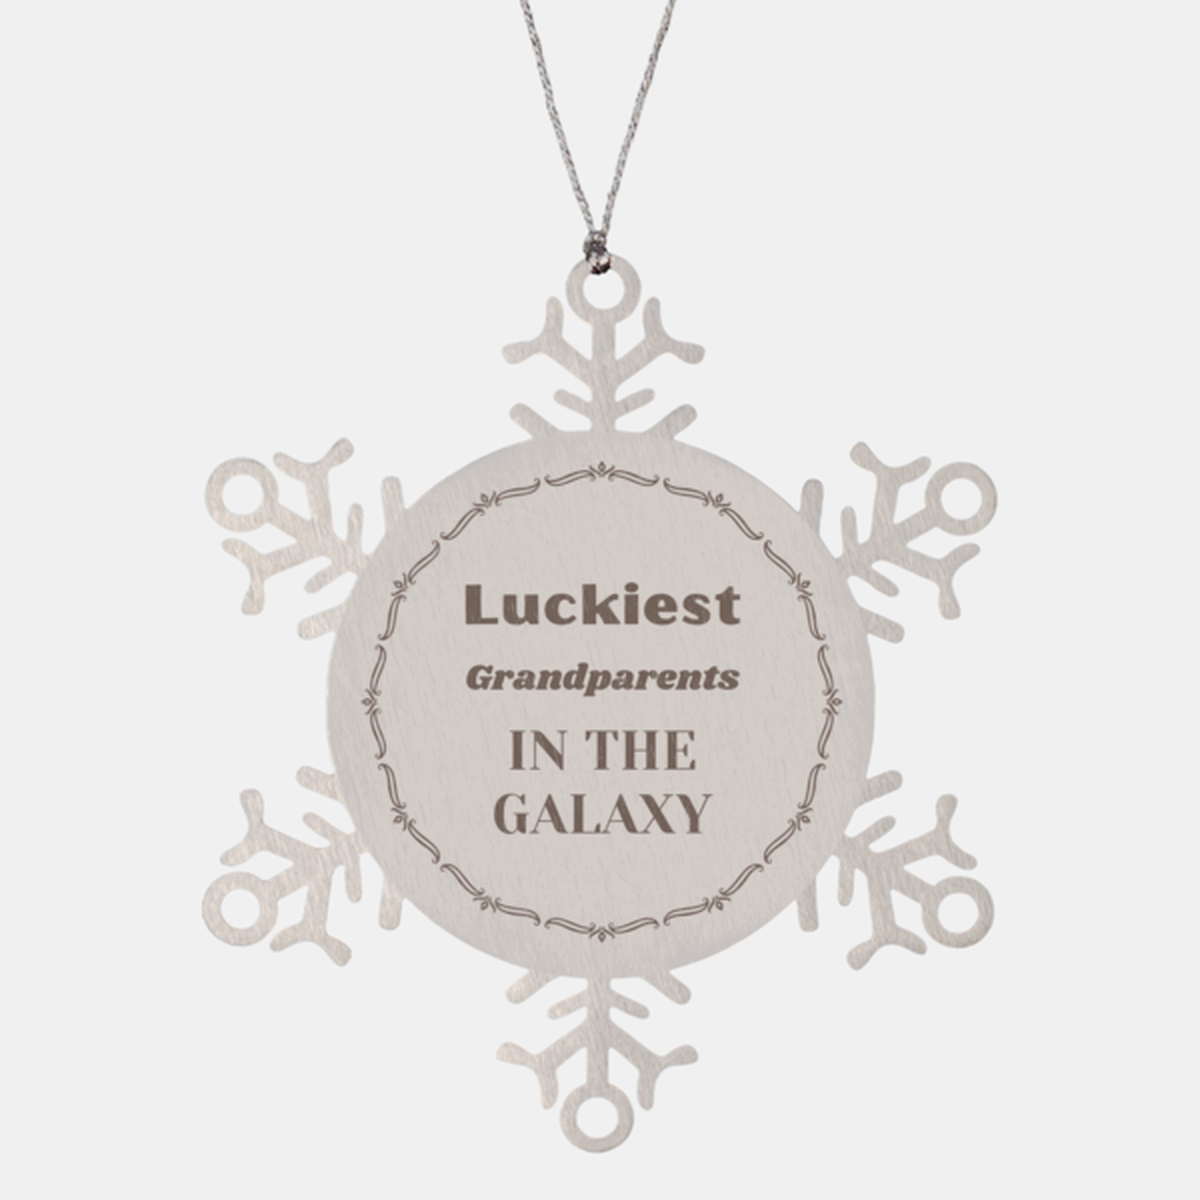 Luckiest Grandparents in the Galaxy, To My Grandparents Ornament Gifts, Christmas Grandparents Snowflake Ornament Gifts, X-mas Decorations Unique Gifts For Grandparents Men Women